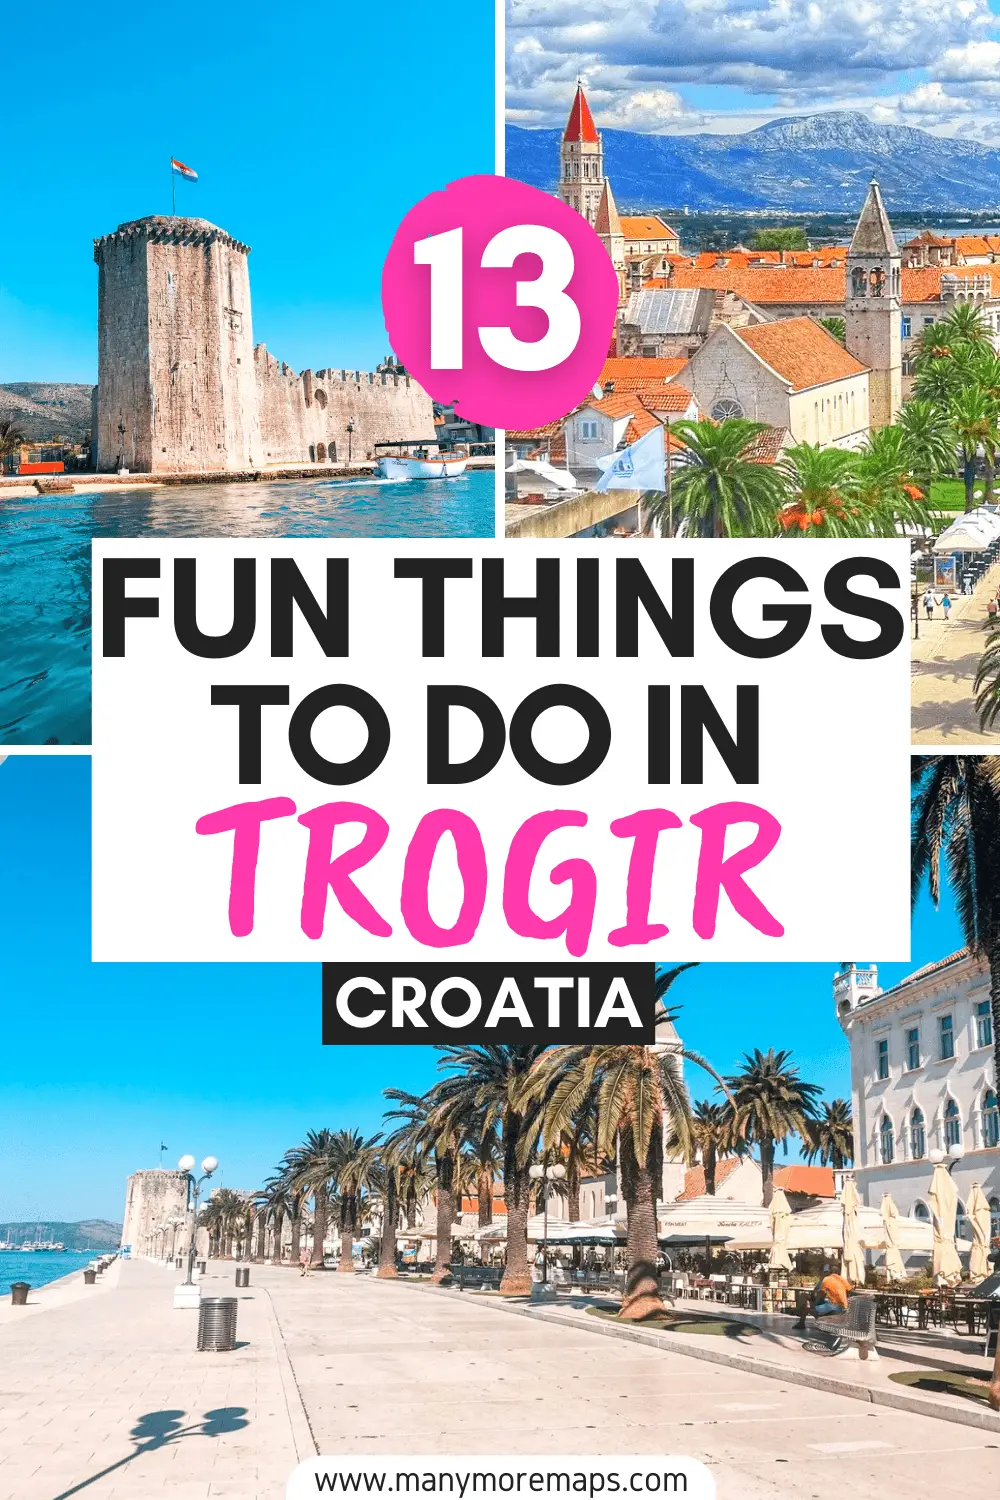 Planning a day trip from Split to the charming town of Trogir in Croatia? Here's everything you need to know to start your trip planning, including the best things to do in Trogir, whether it's worth visiting, and the most beautiful places to visit.